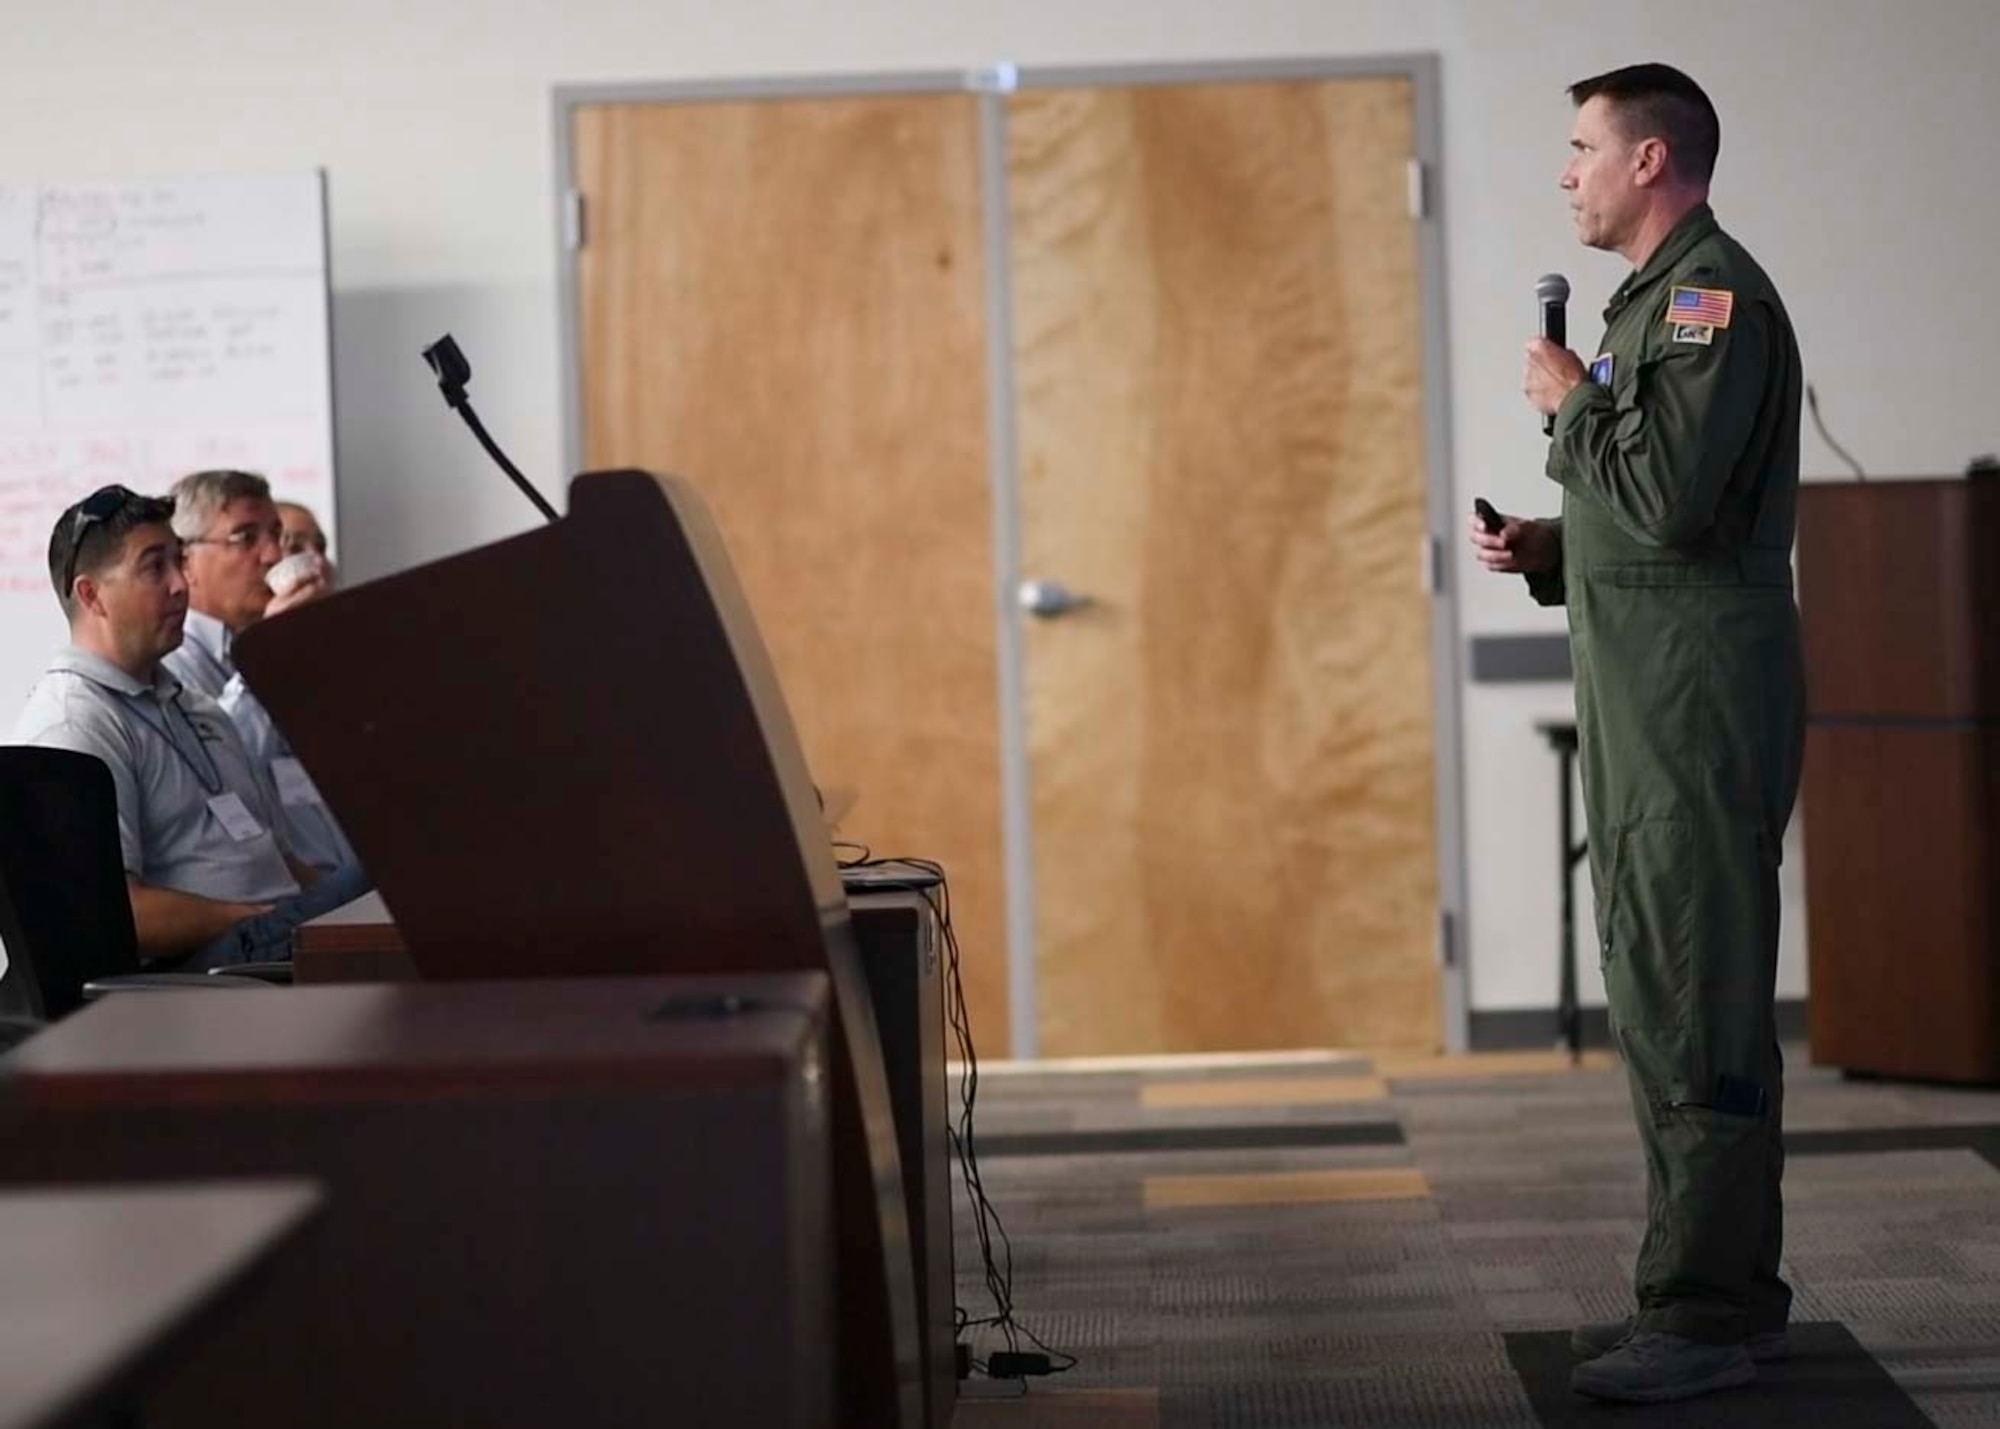 Lt. Col. Mark Breidenbaugh, the chief entomologist assigned to the 910th Airlift Wing's 757th Airlift Squadron, explains C-130H Hercules swath characterizations to the audience during a Department of Defense aerial spray course, Jan. 8, 2019 at the Lee County Mosquito Control District facilities in Lehigh Acres, Florida.